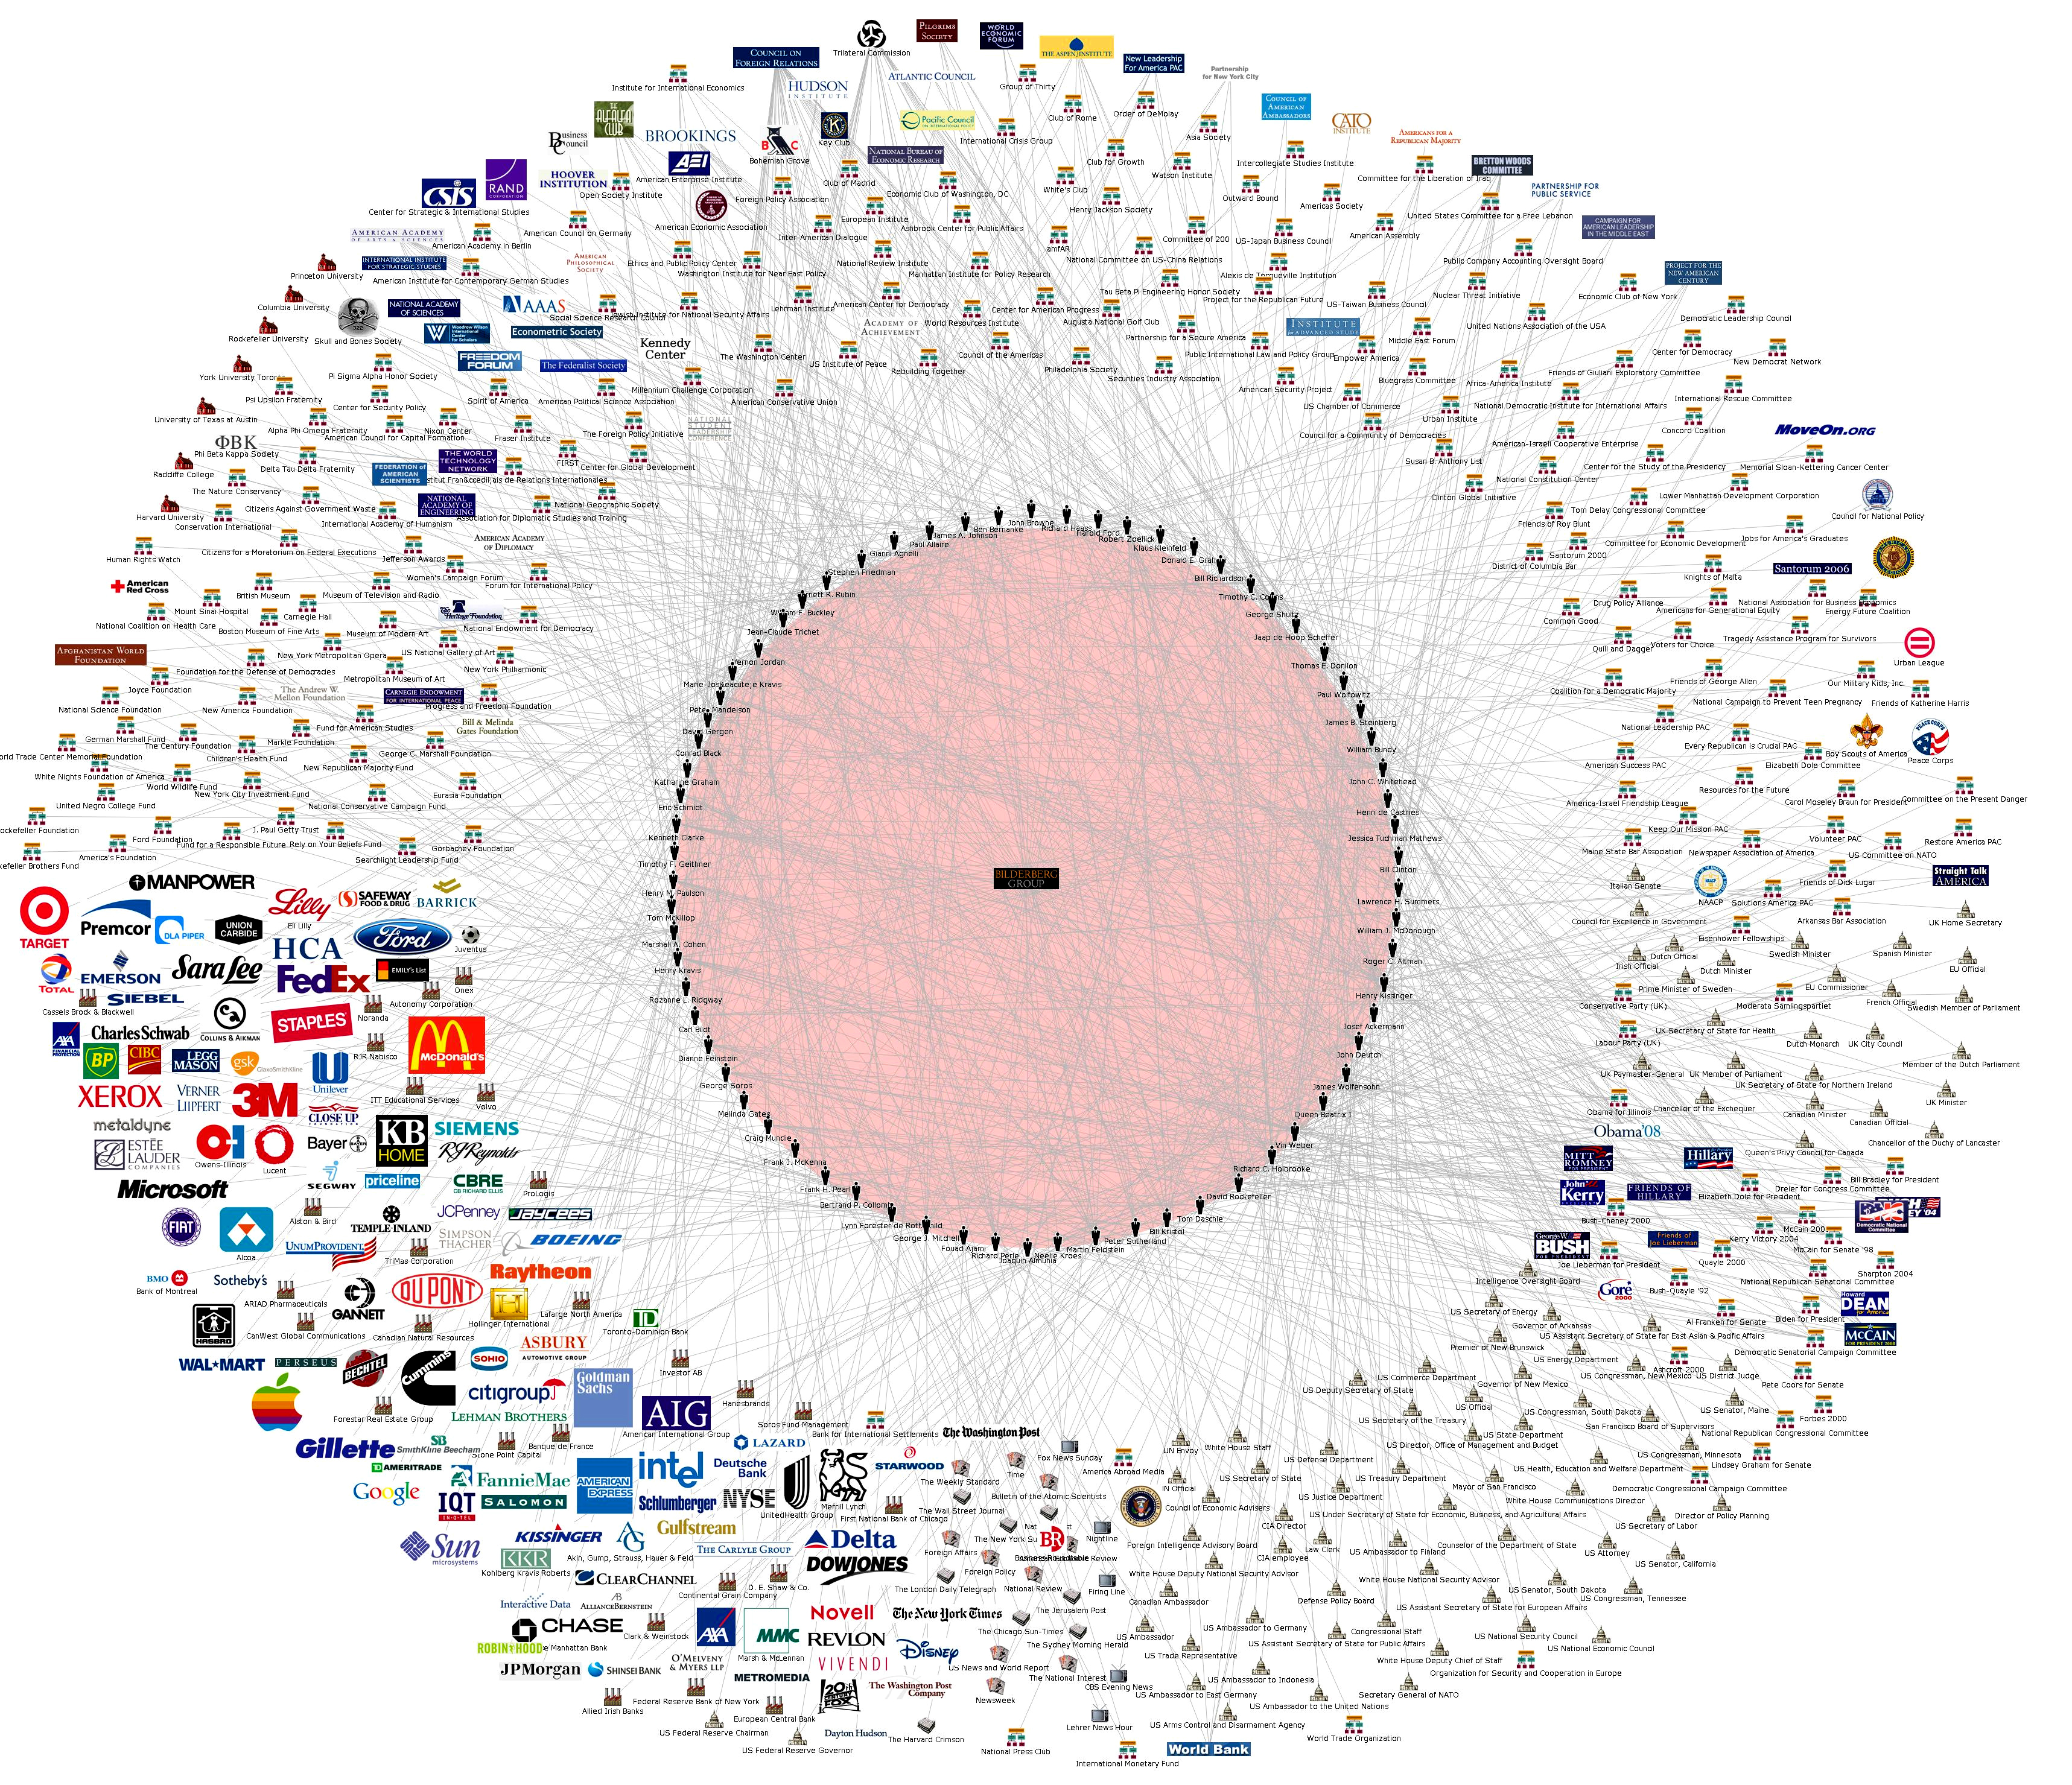 The Bilderberg Group is 120-140 powerful people who meet each year to discuss policy. The meetings are closed to the public. - Business Insider 